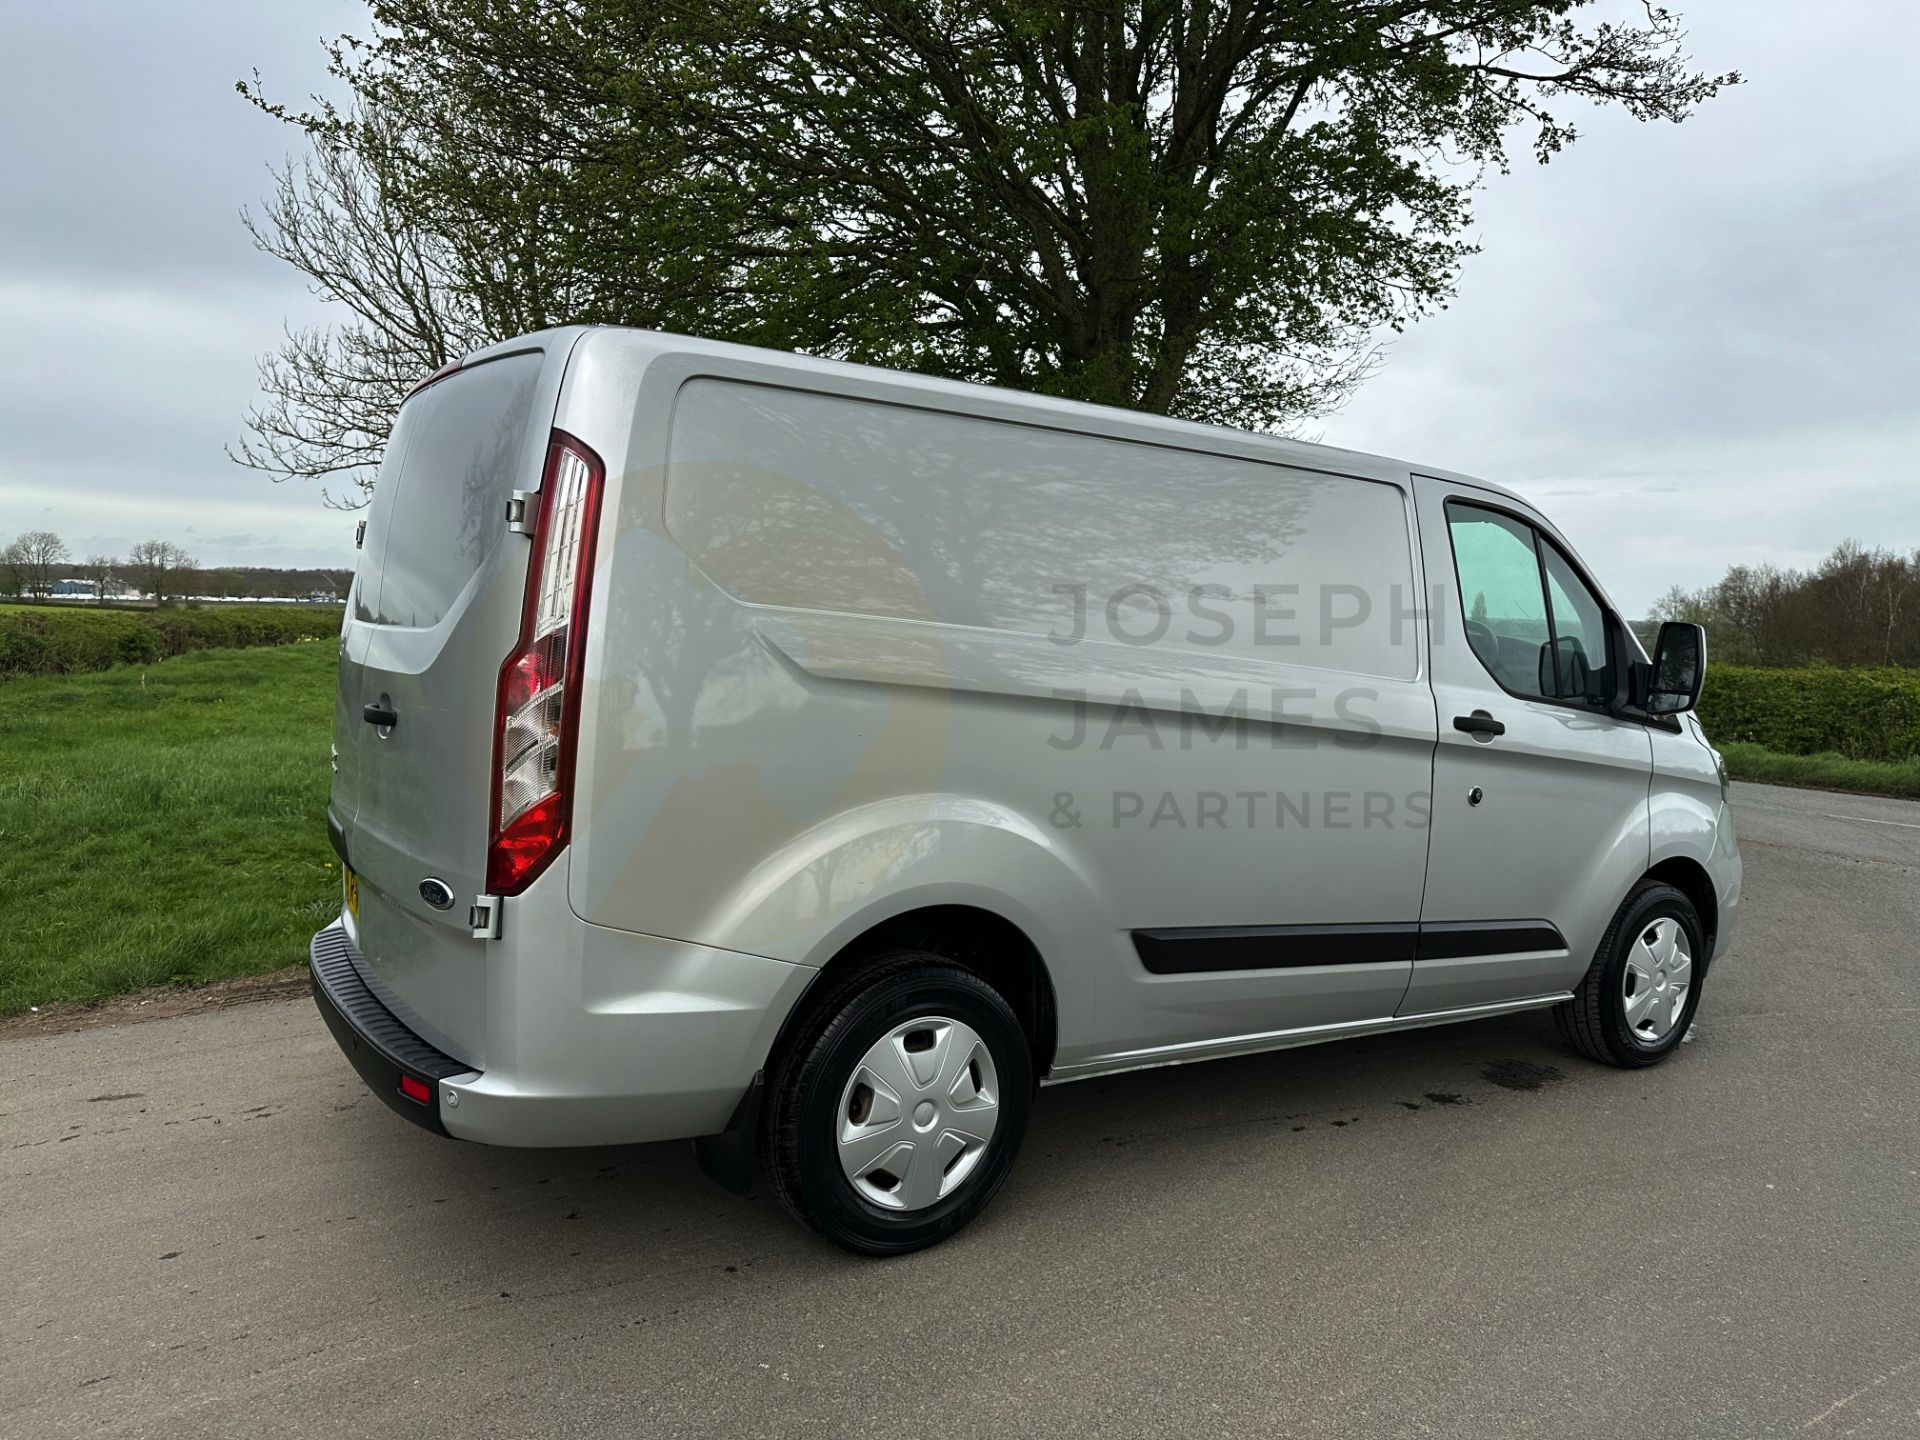 FORD TRANSIT CUSTOM "TREND" 2.0TDCI (130) 20 REG -1 OWNER- SILVER -GREAT SPEC -LOW MILEAGE - Image 13 of 38